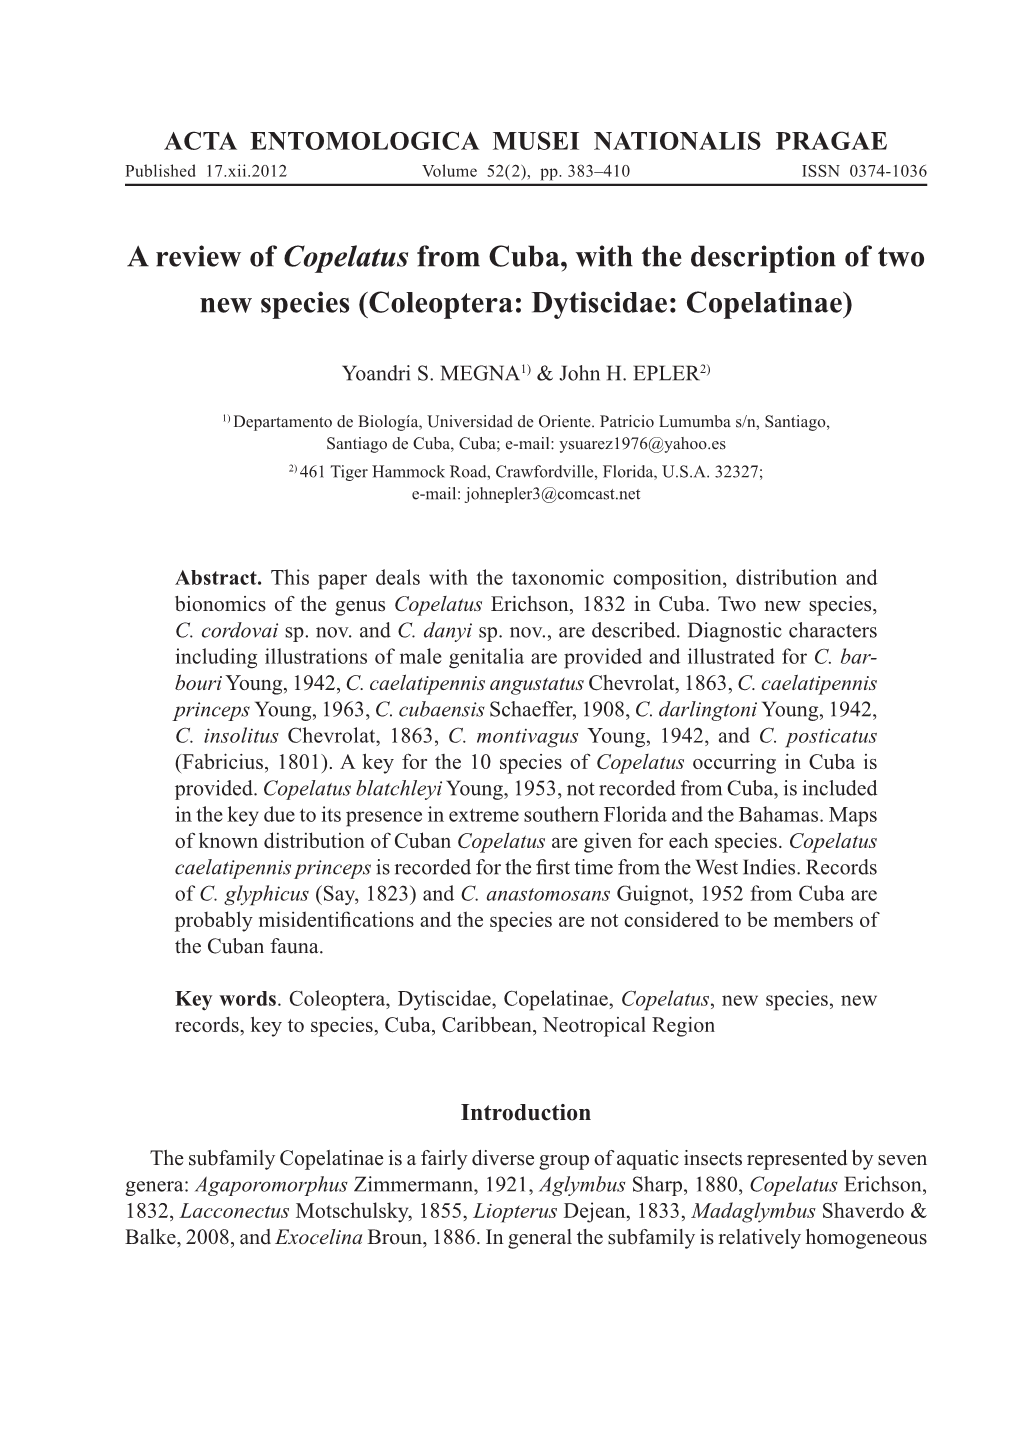 A Review of Copelatus from Cuba, with the Description of Two New Species (Coleoptera: Dytiscidae: Copelatinae)